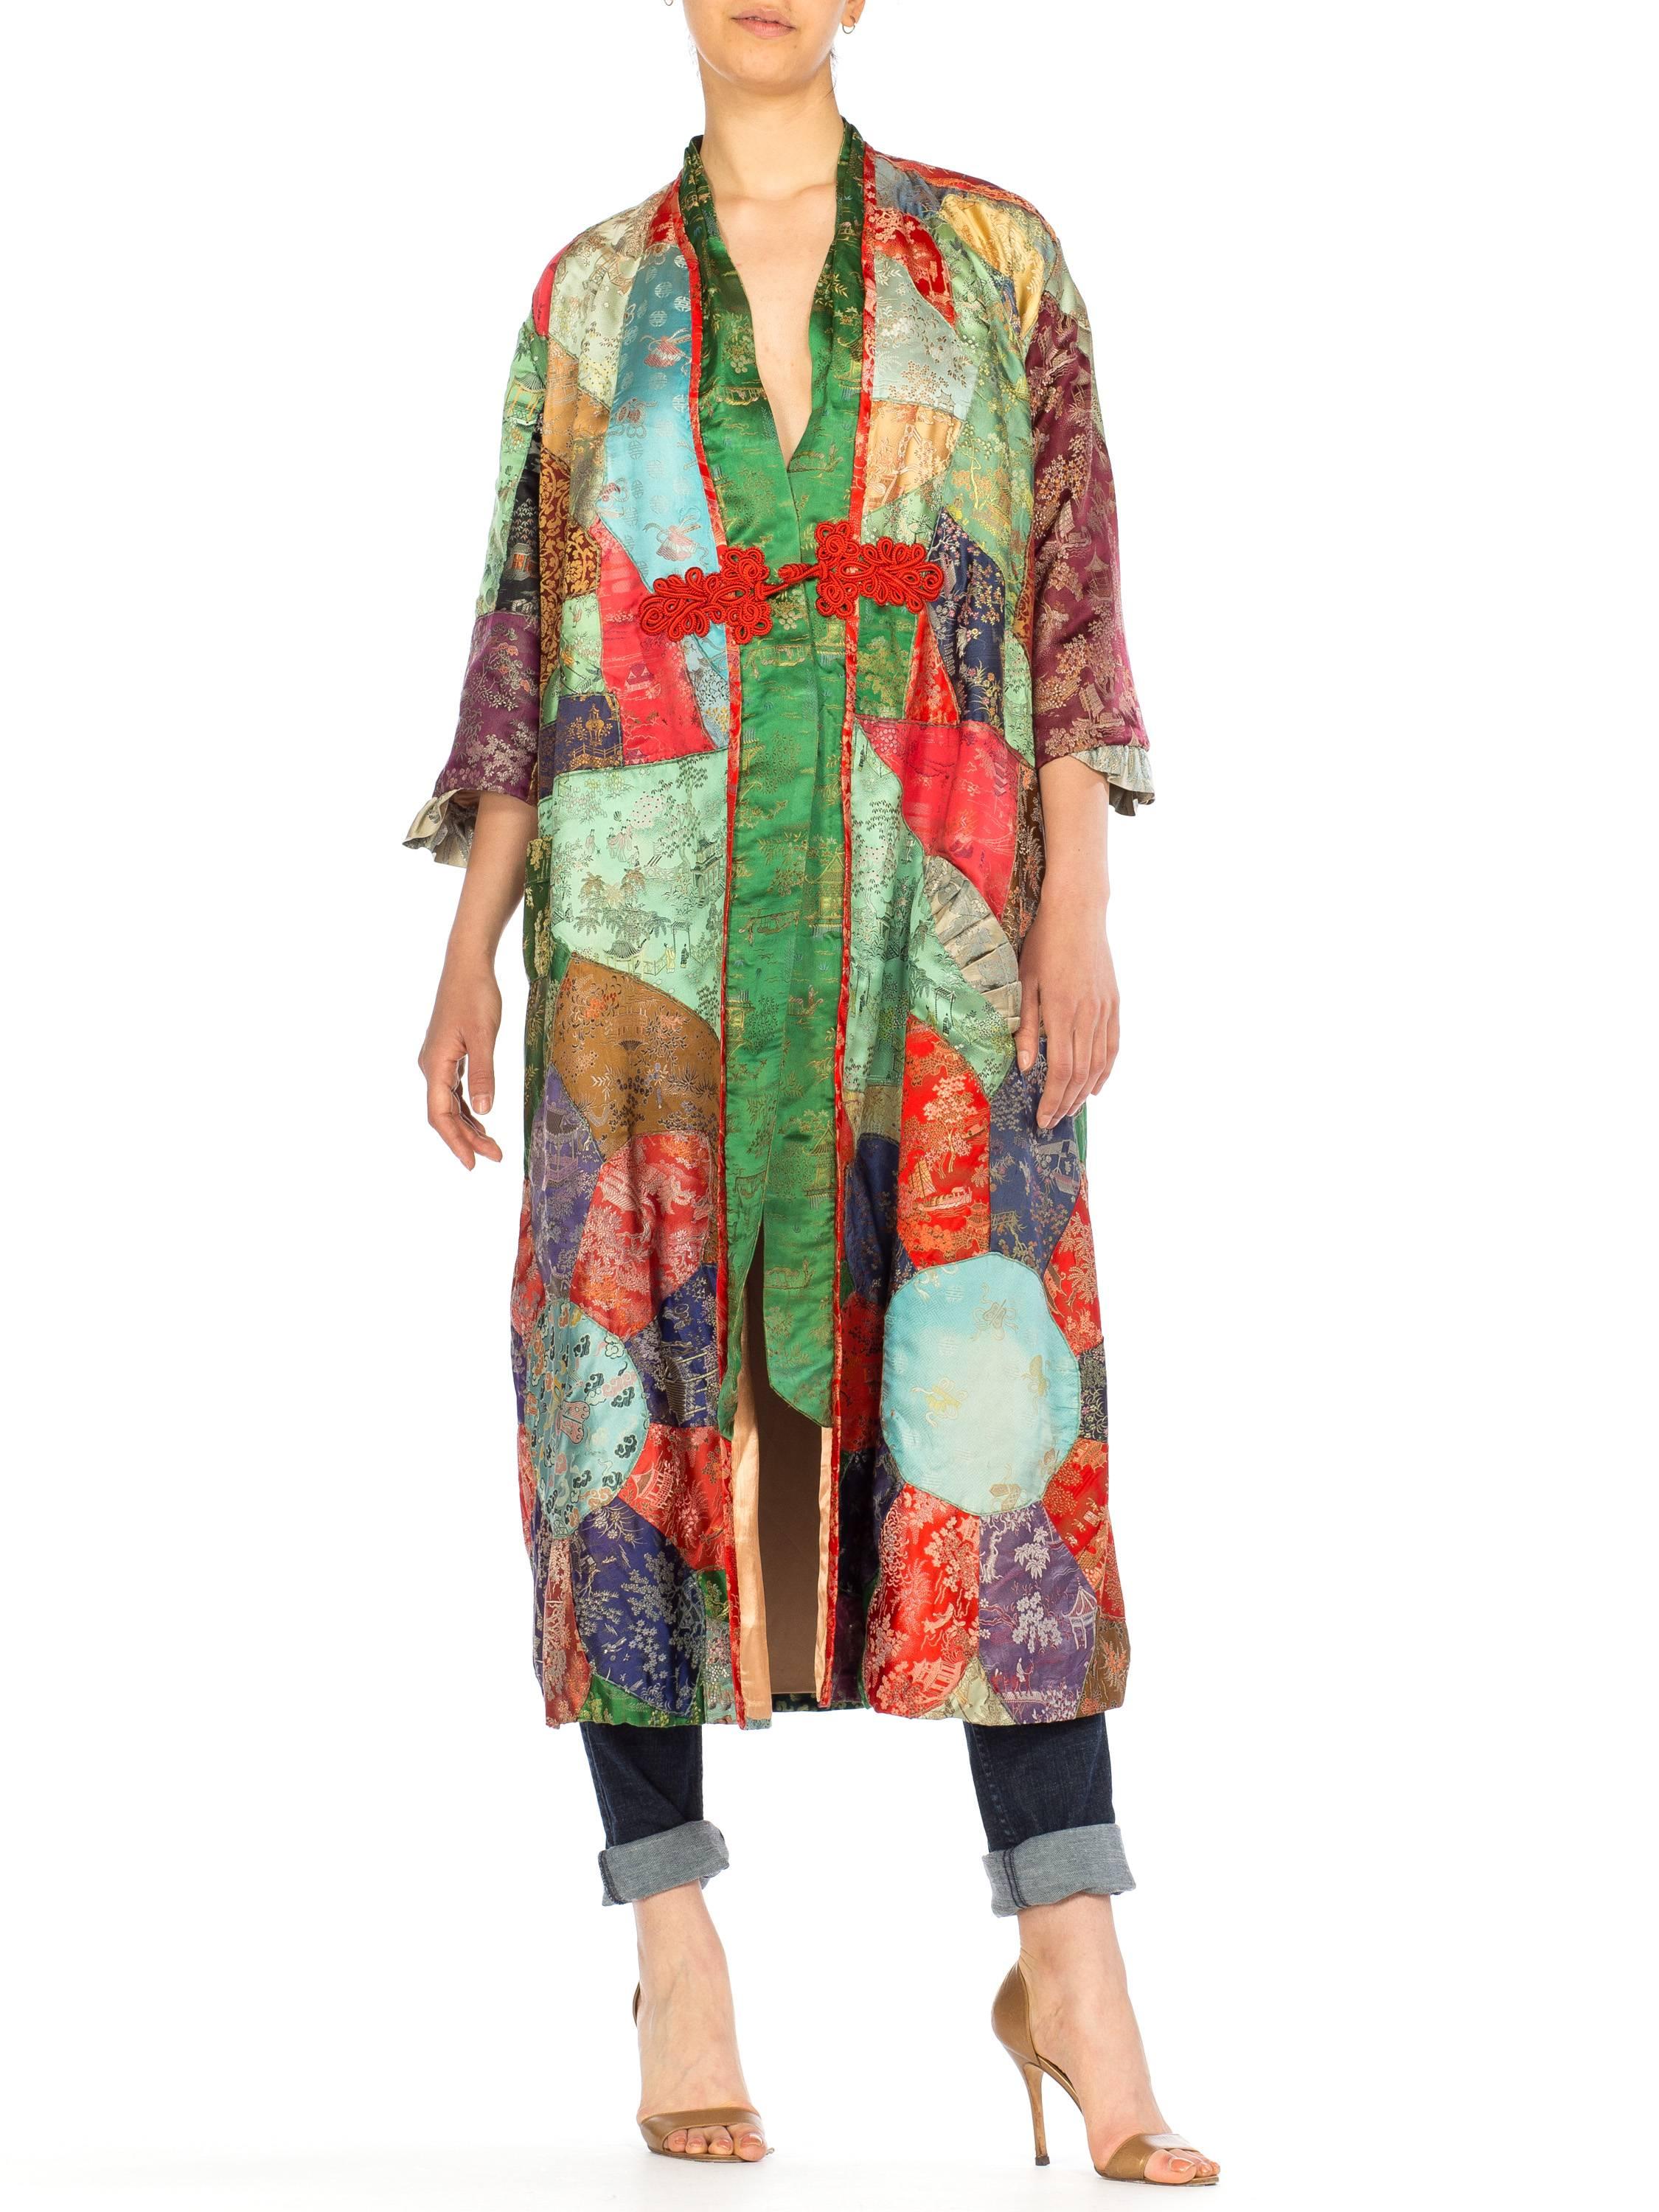 MORPHEW COLLECTION Silk Brocade Antique Fabric Patchwork Duster Coat
MORPHEW COLLECTION is made entirely by hand in our NYC Ateliér of rare antique materials sourced from around the globe. Our sustainable vintage materials represent over a century